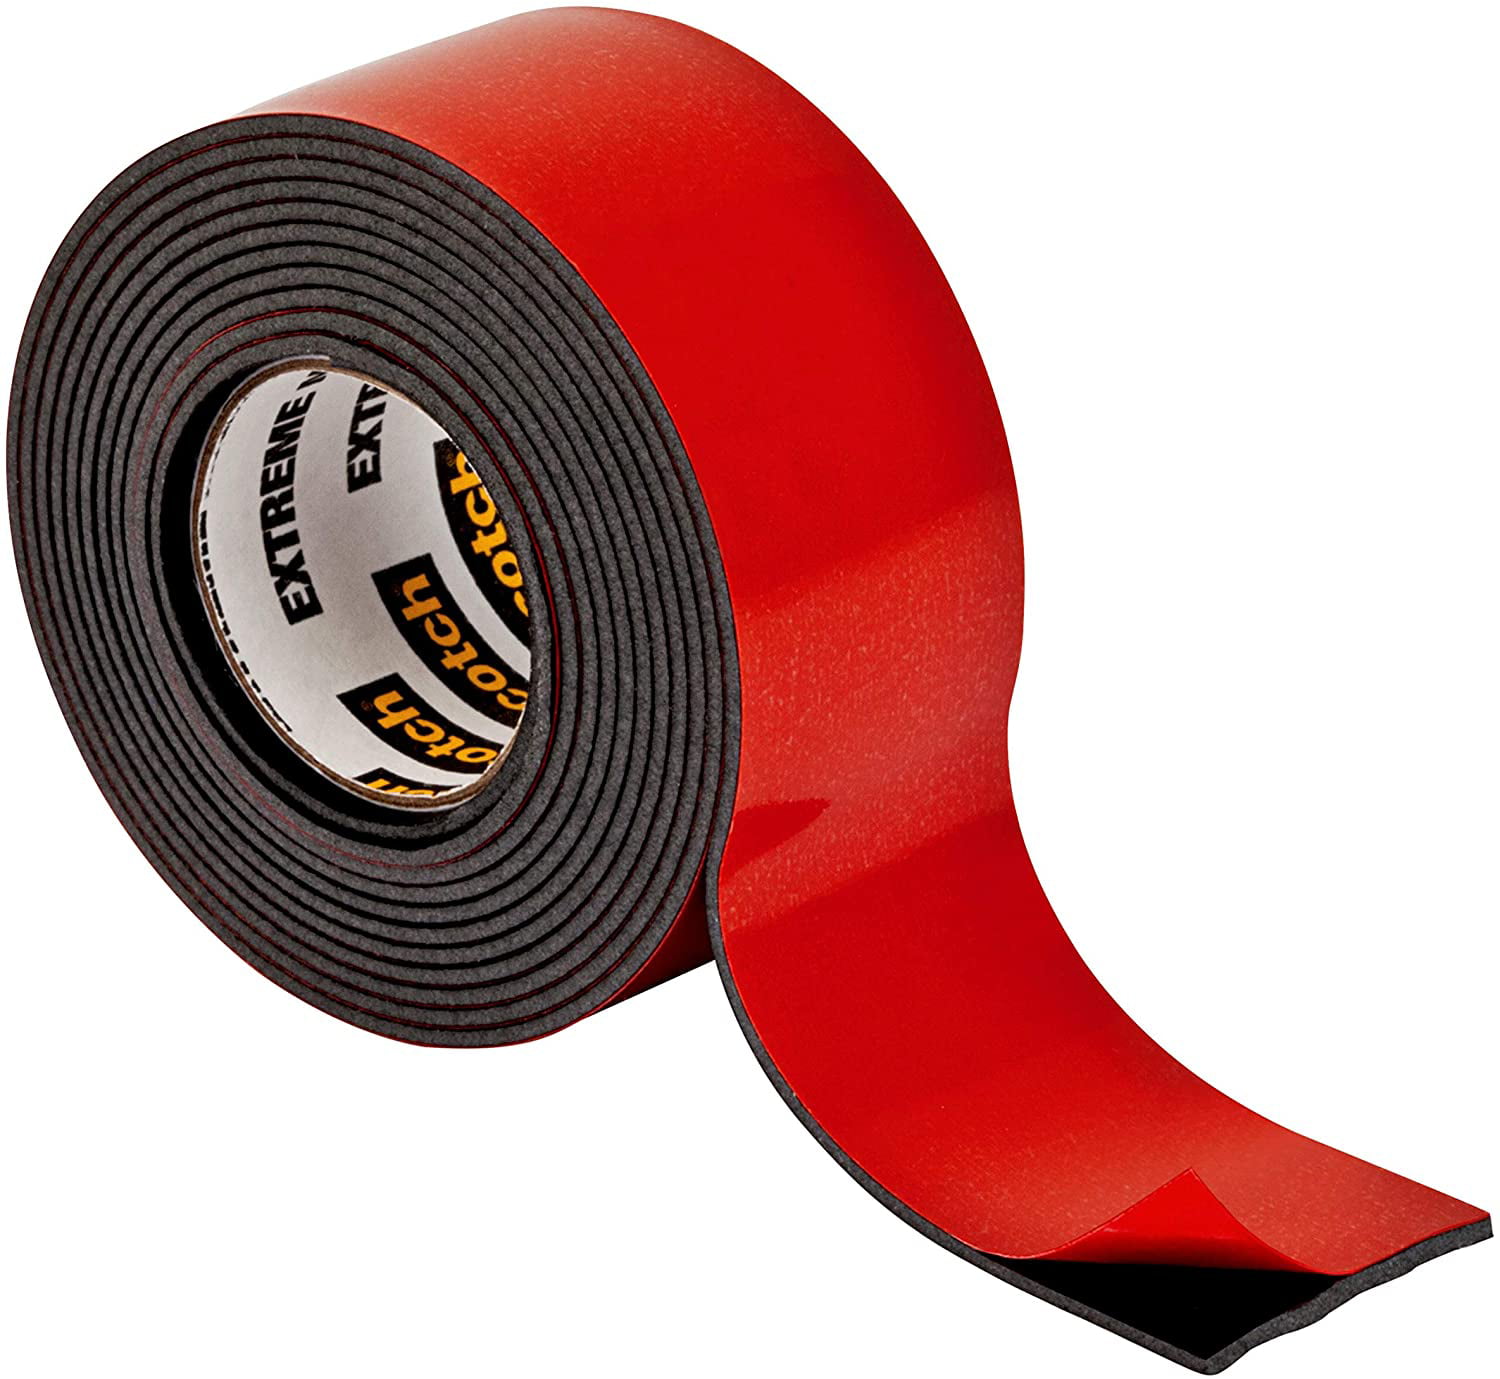 1 in x 60 in 414DC-SFEF Double Sided Foam Tape Extremely Strong Mounting Tape 2.54 cm x 1.52 m